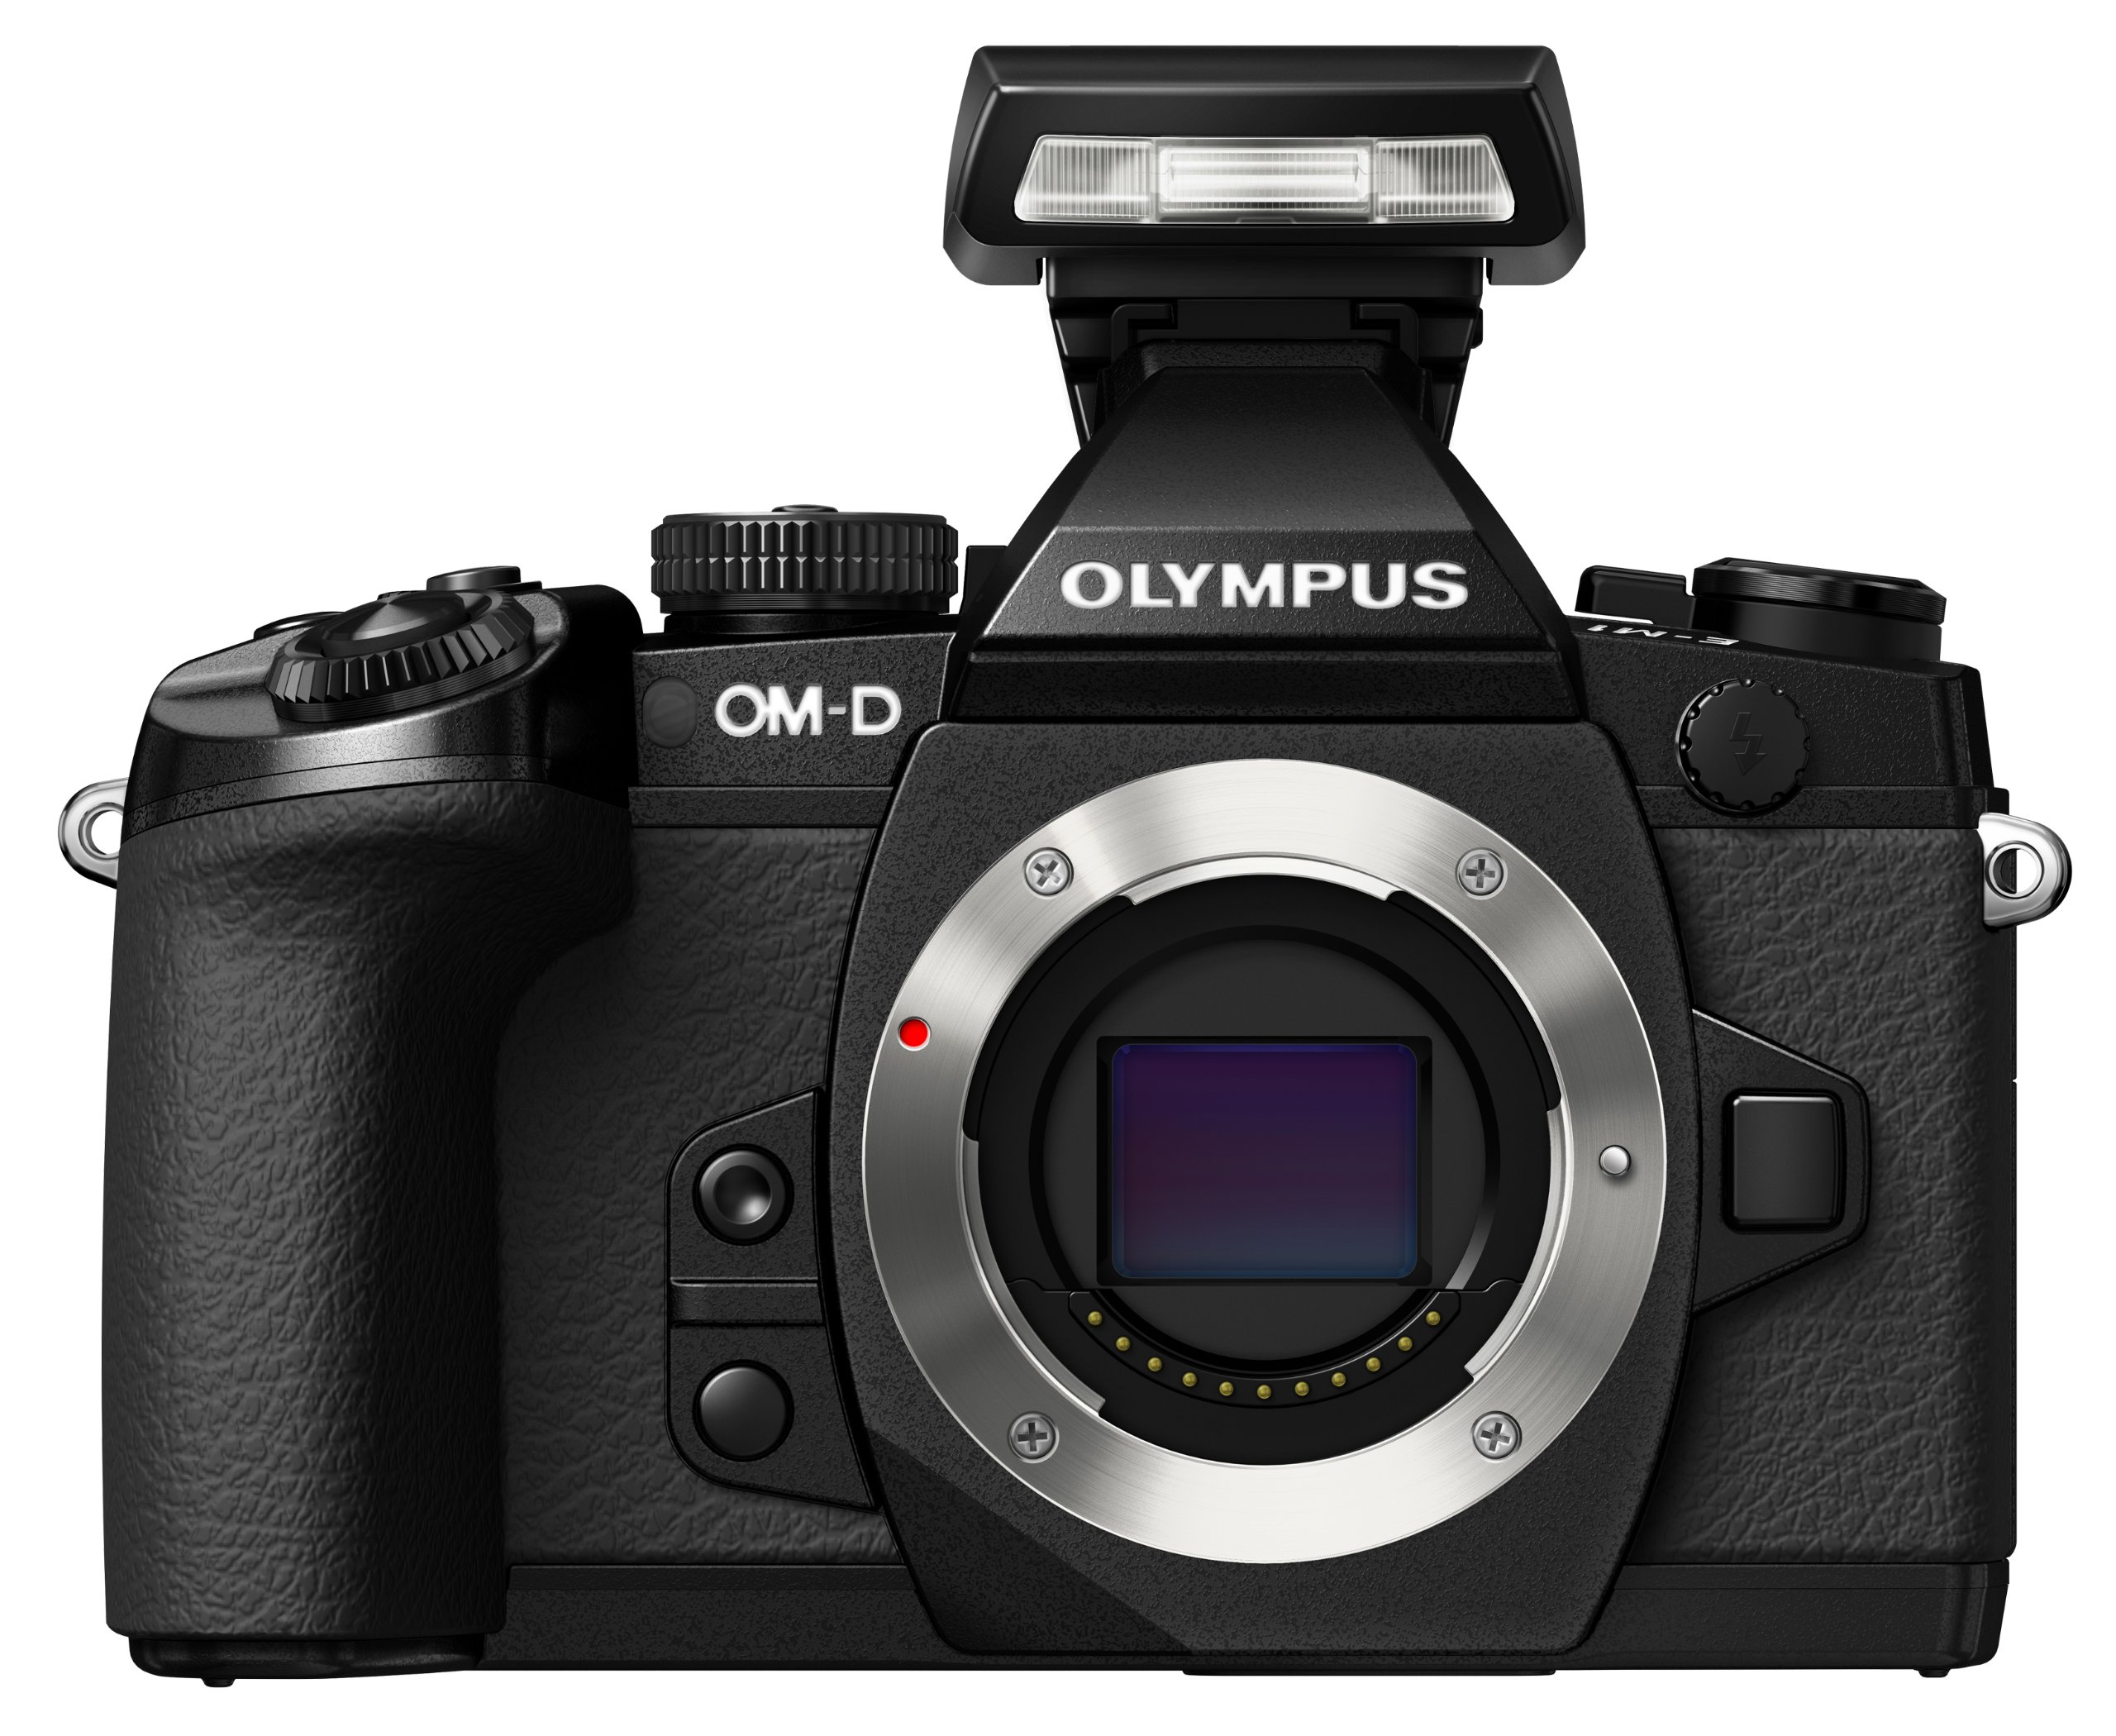 Olympus OM-D E-M1 Mirrorless Digital Camera with 16MP and 3-Inch LCD (Body Only) (Black)